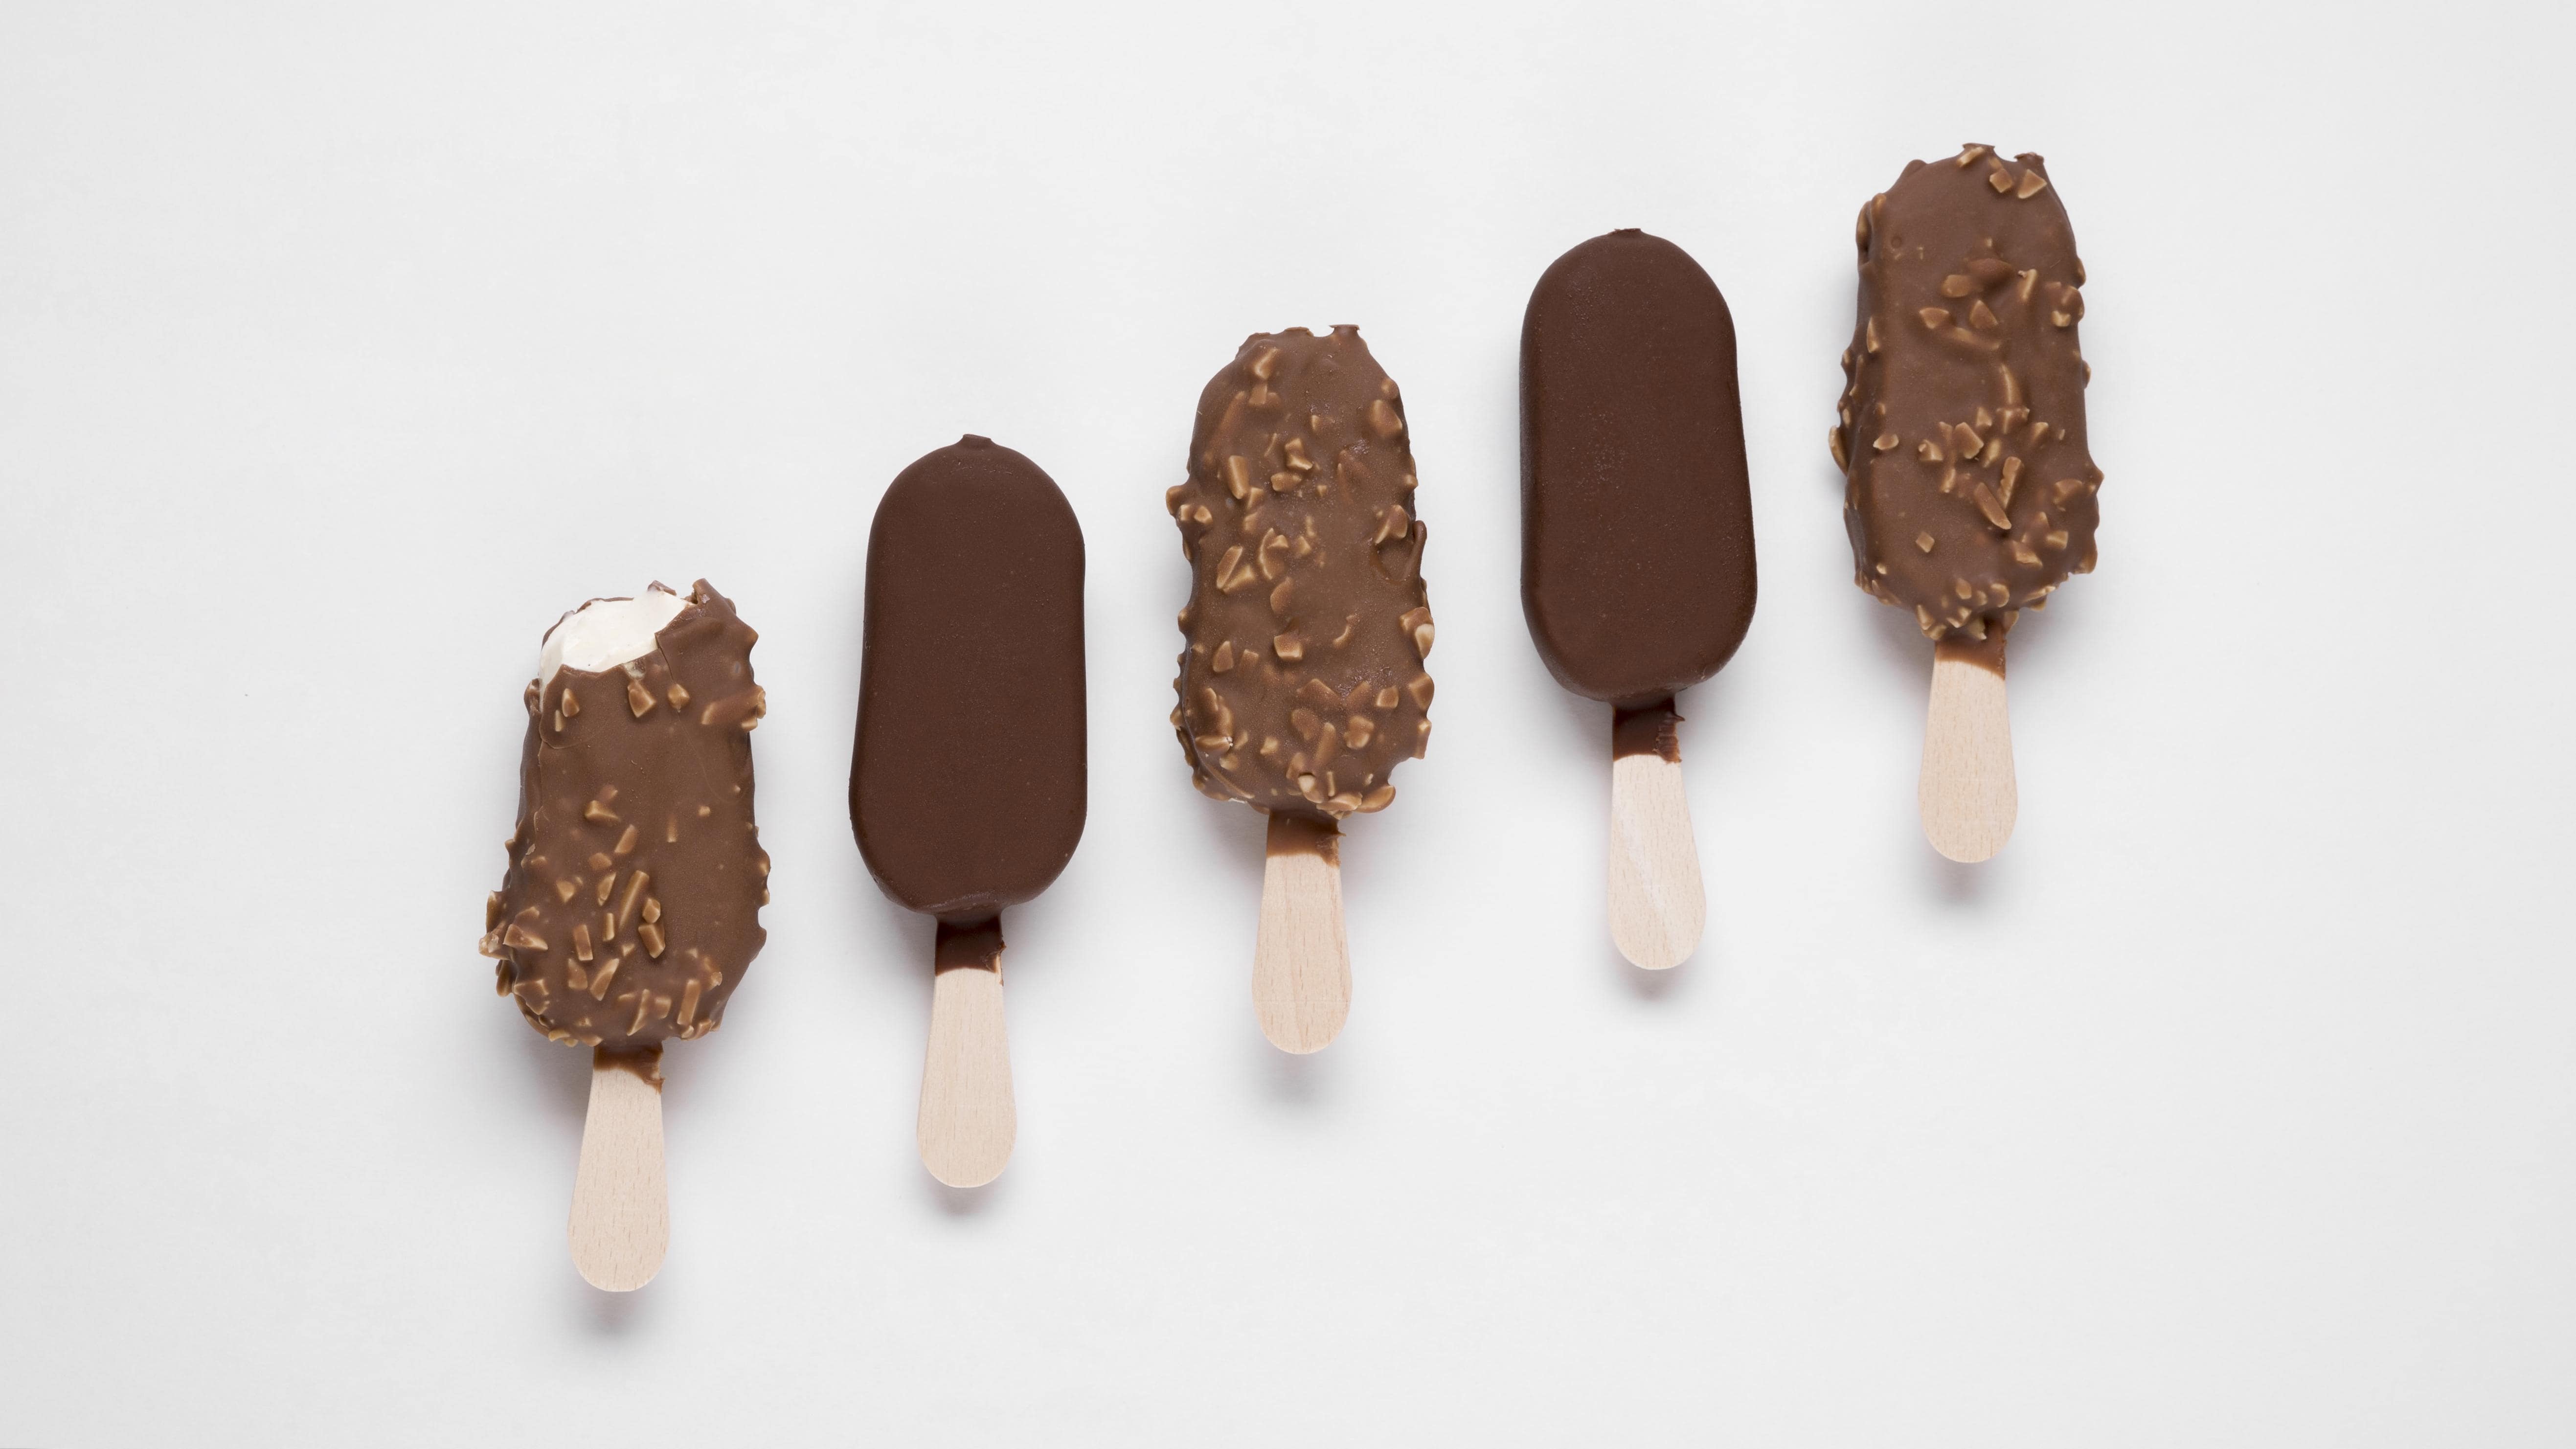 Ice cream trends: transparent and ethical ingredients